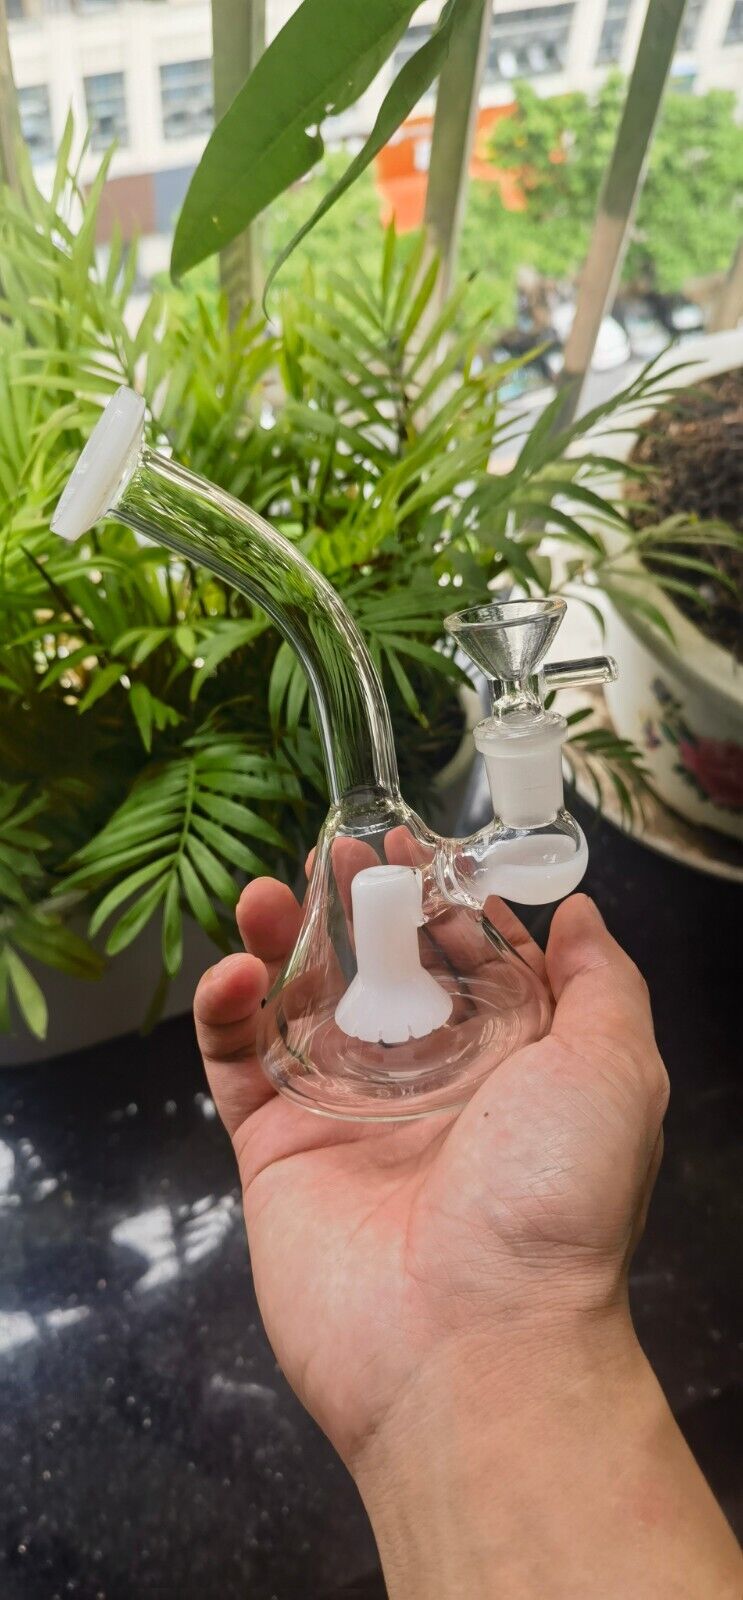 6 inch white Glass Bong Hookah Water Smoking Pipe Bubbler with 14mm Male Bowl